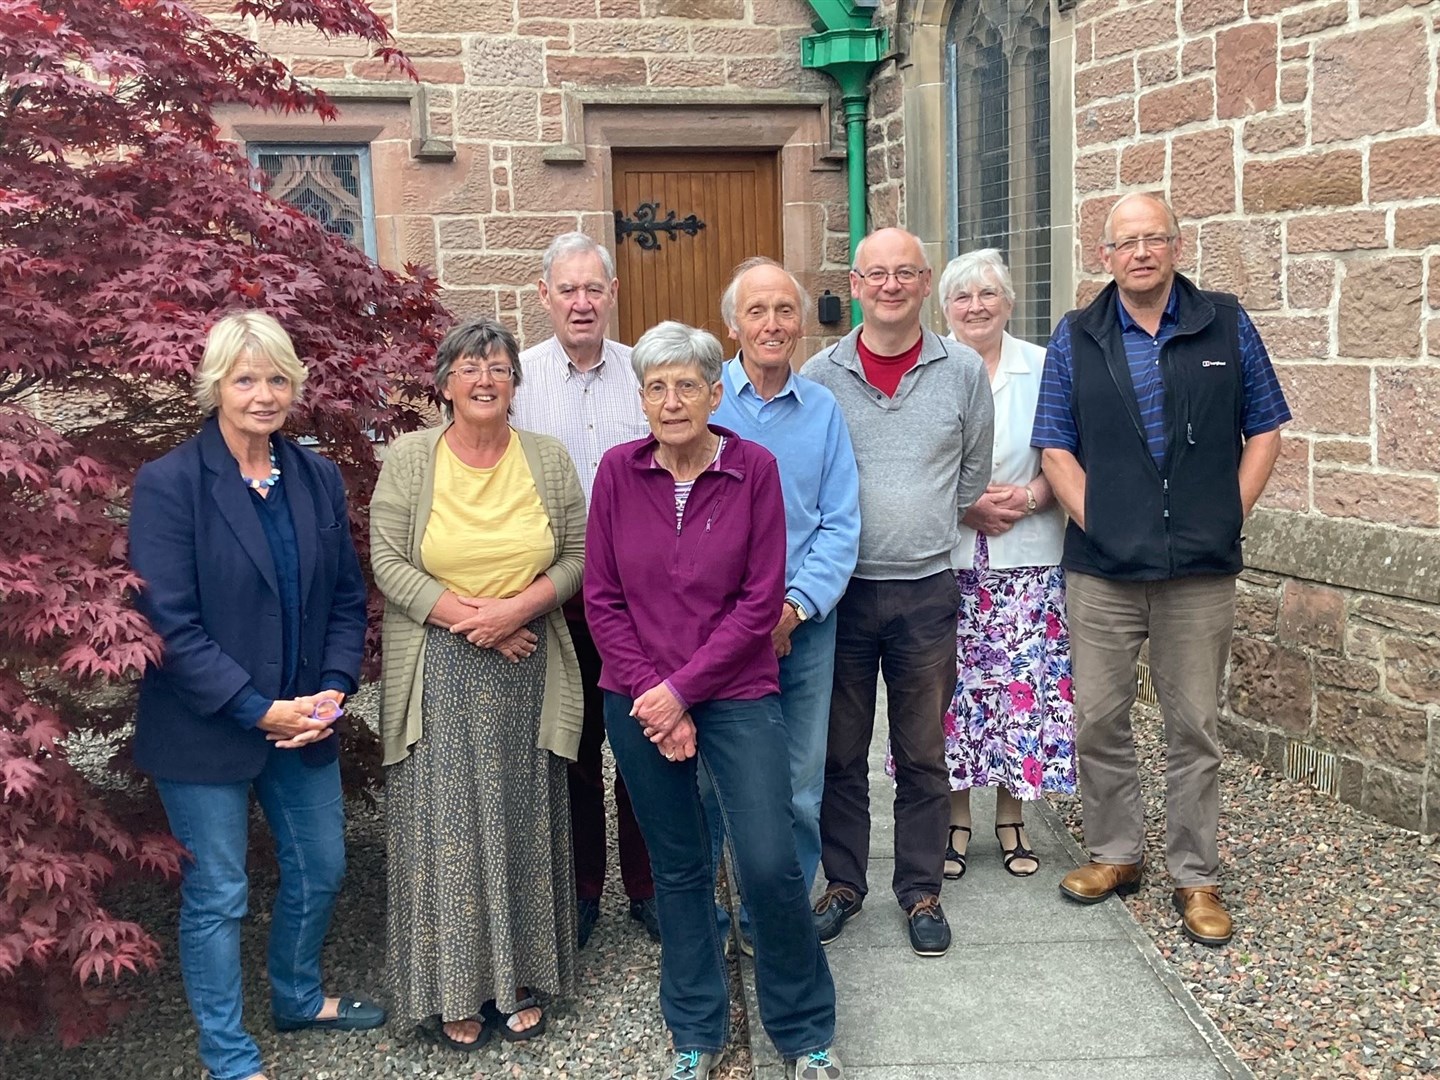 Some members of the Highland Associates Group of the Iona community.